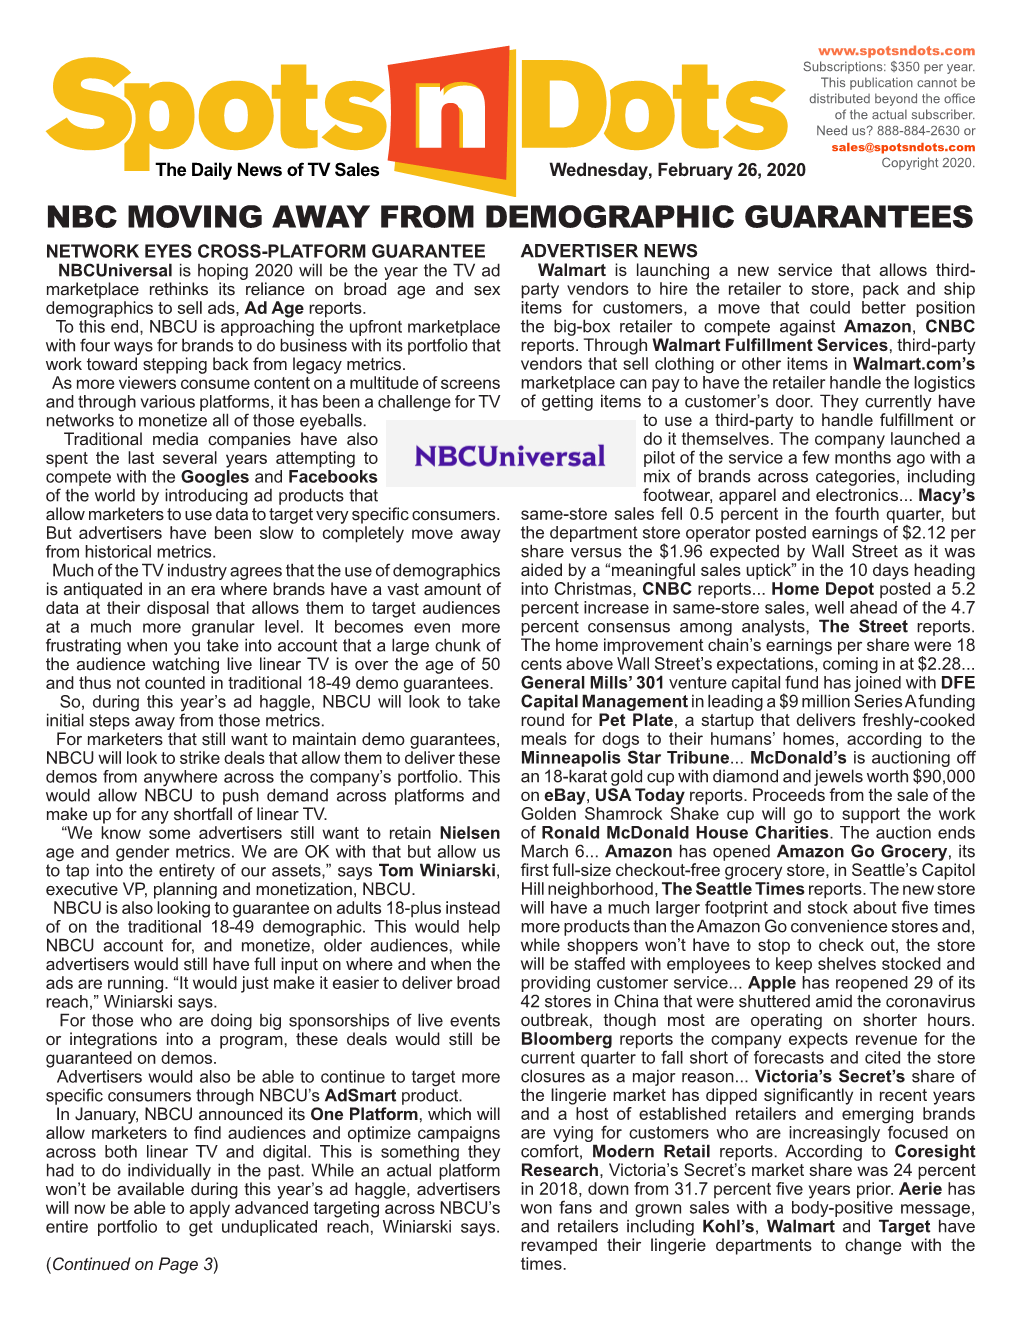 Nbc Moving Away from Demographic Guarantees